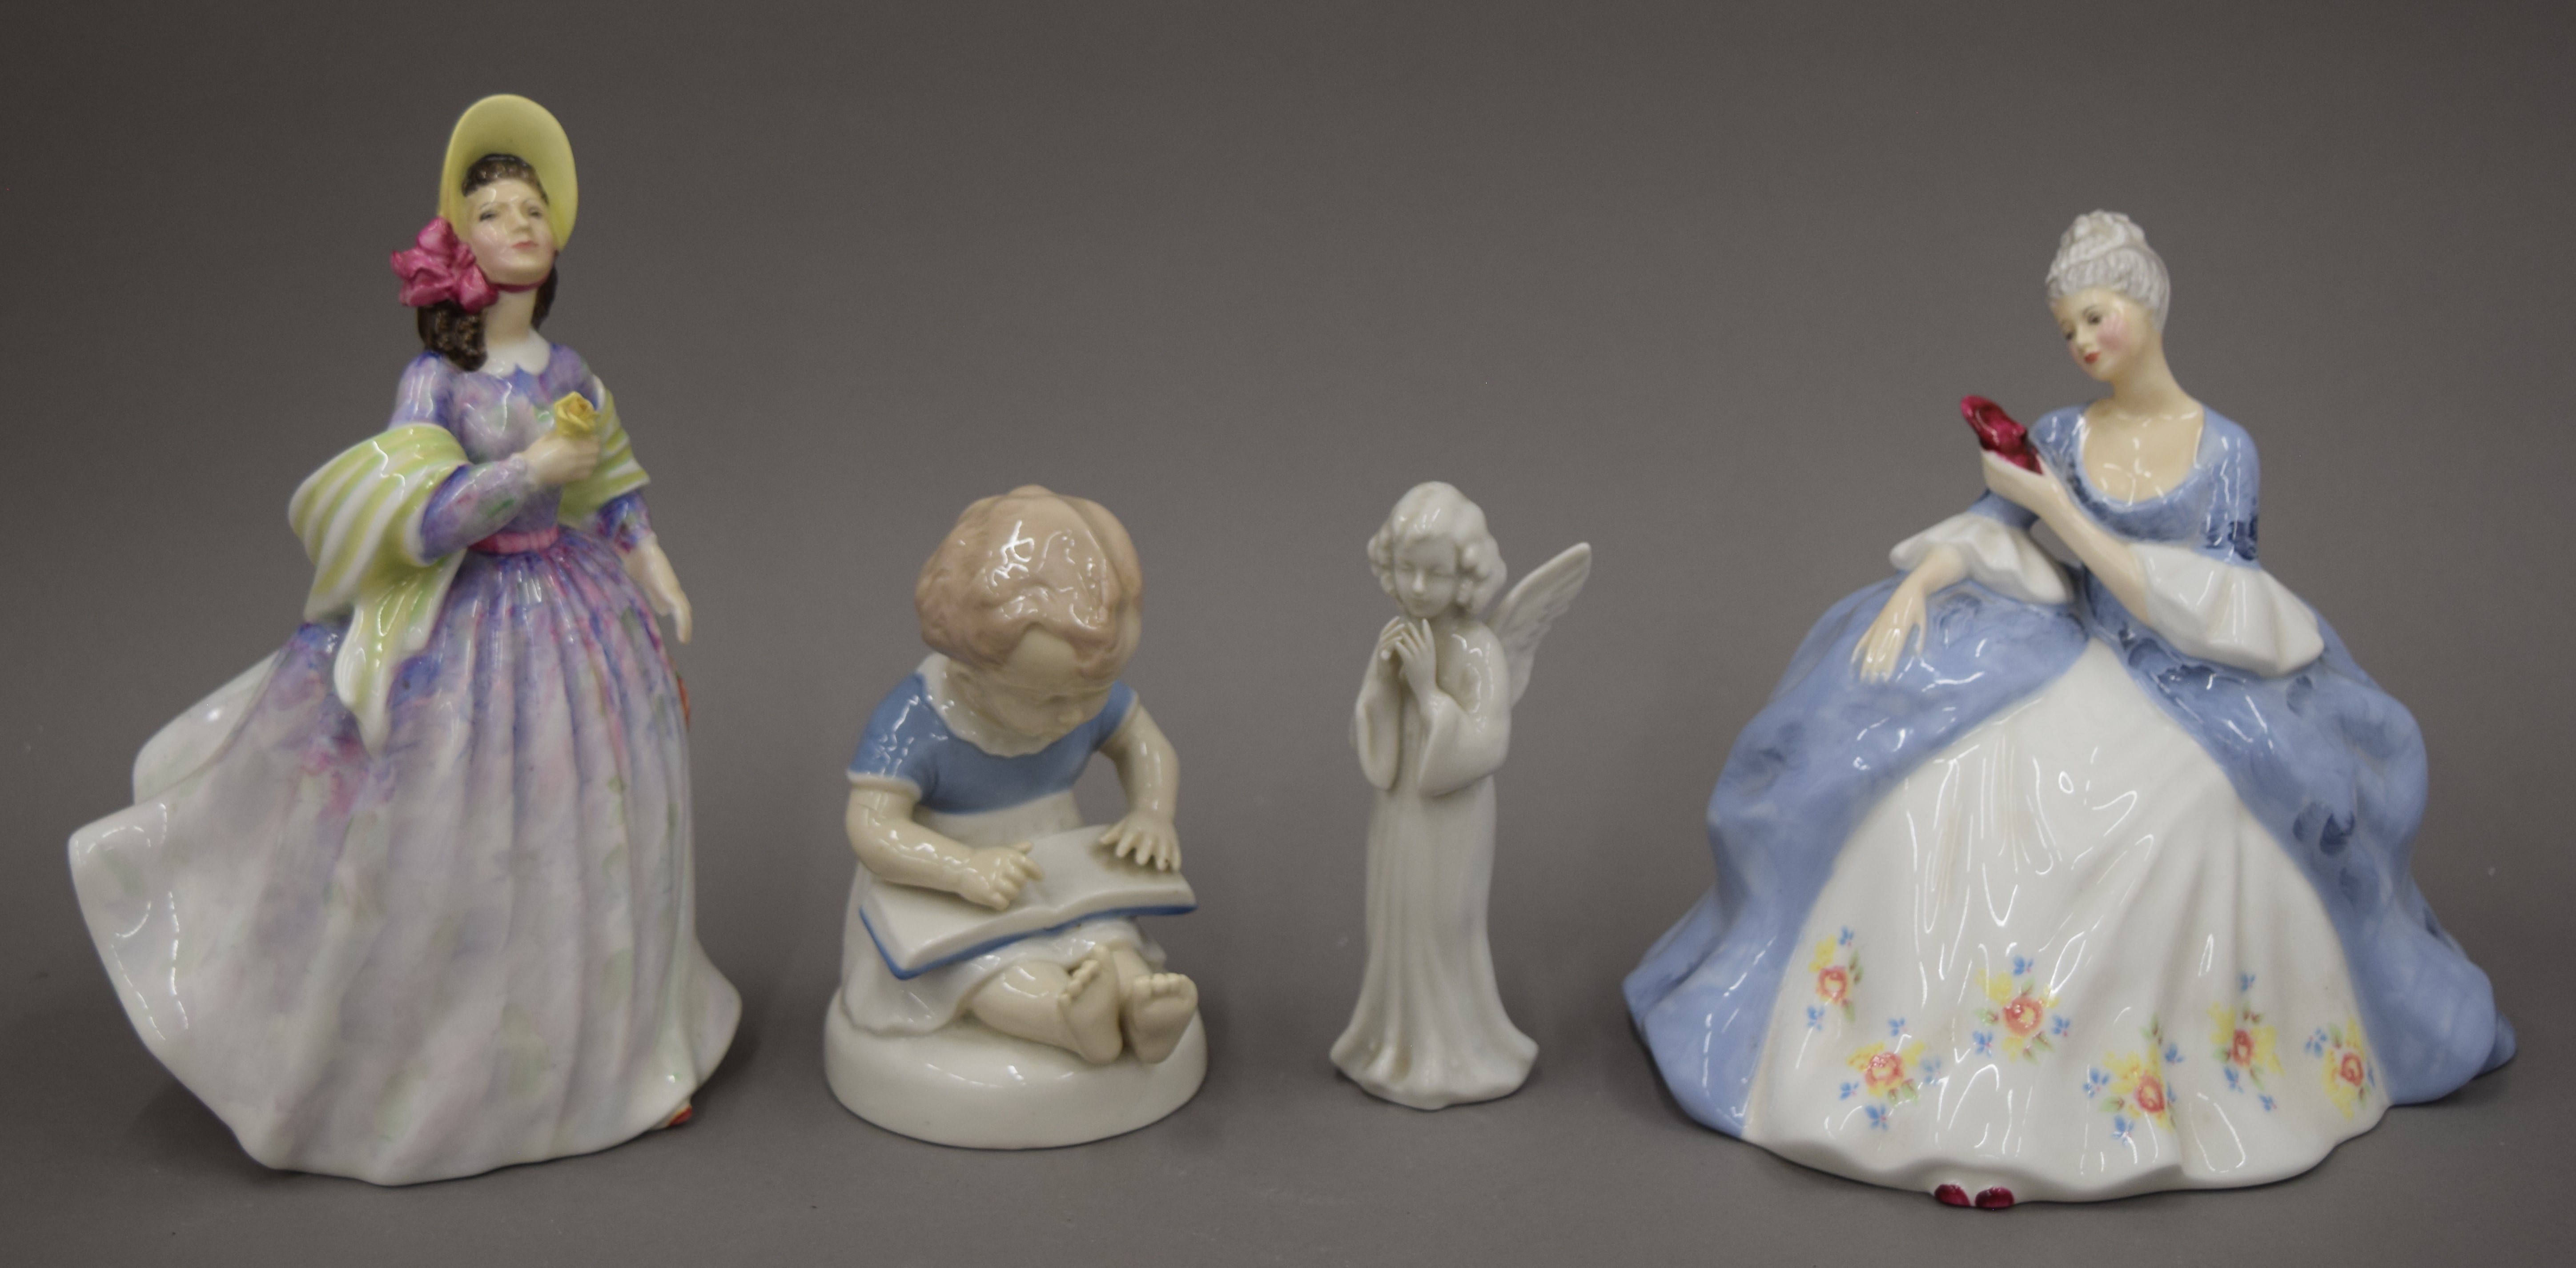 Two Doulton porcelain figurines and two other figurines.